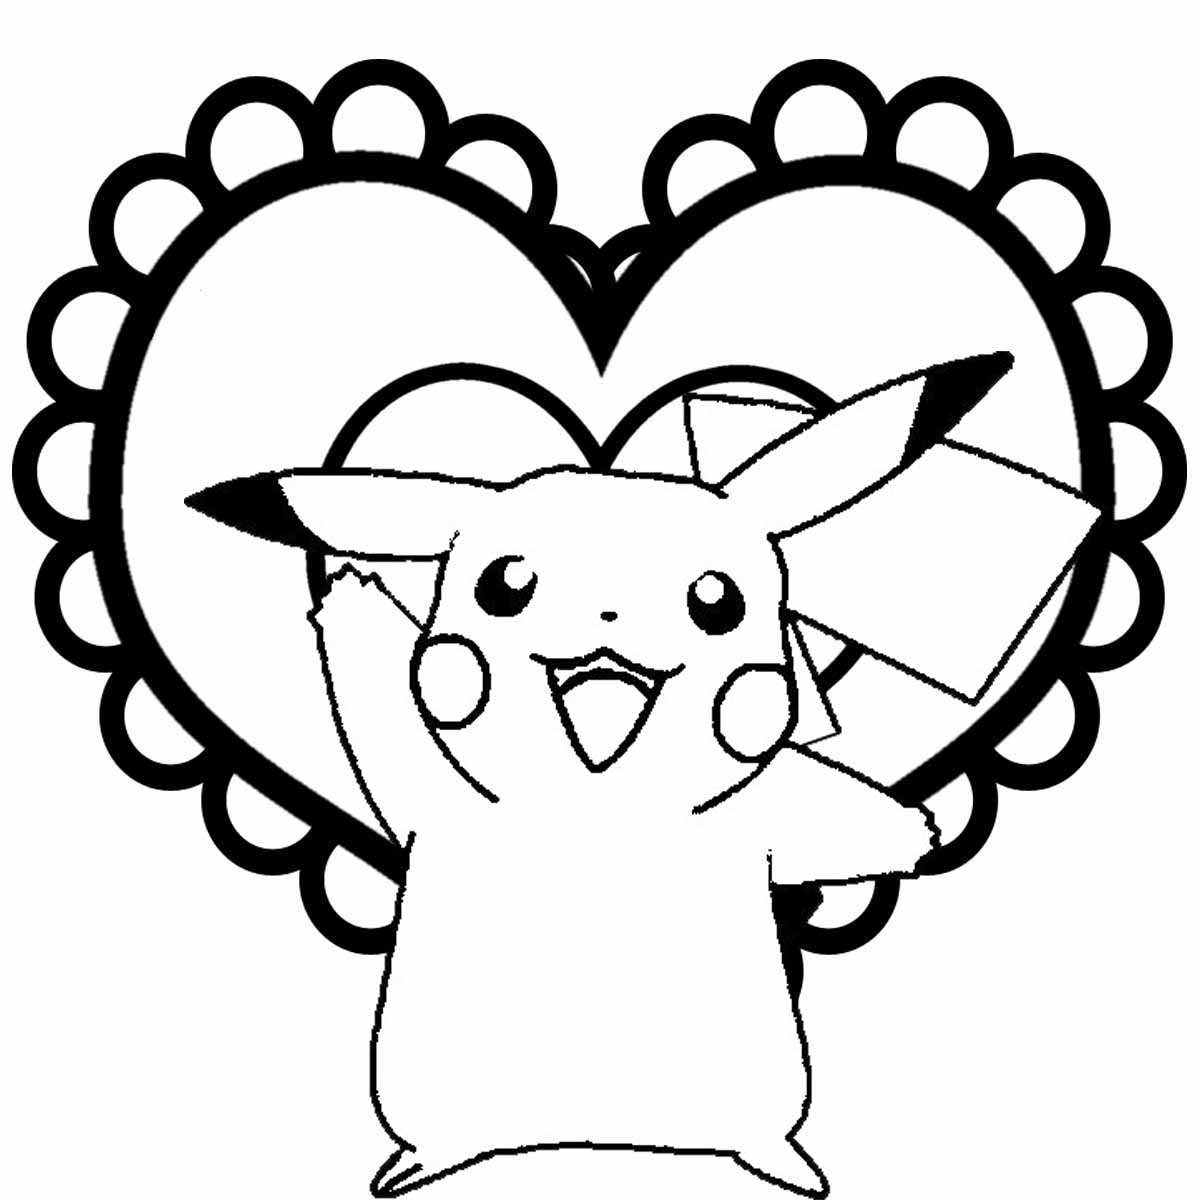 Pokemon for kids   All Pokemon coloring pages Kids Coloring Pages